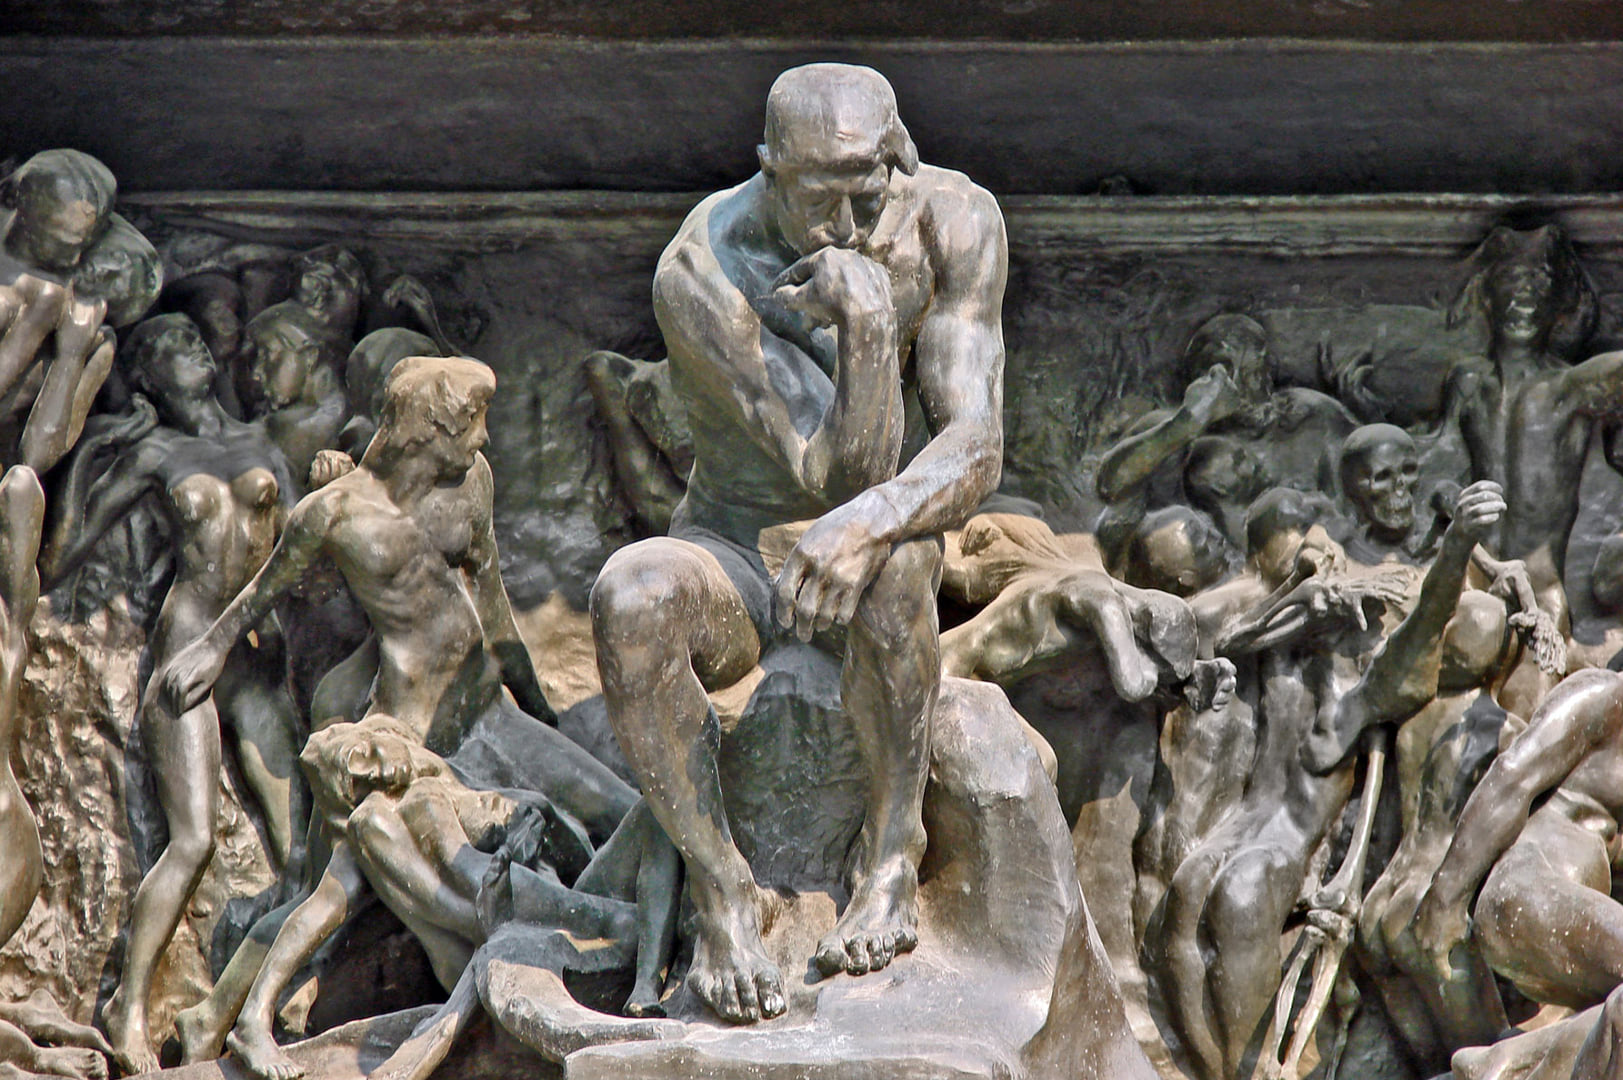 The Thinker in The Gates of Hell by Auguste Rodin, Musée Rodin, Paris